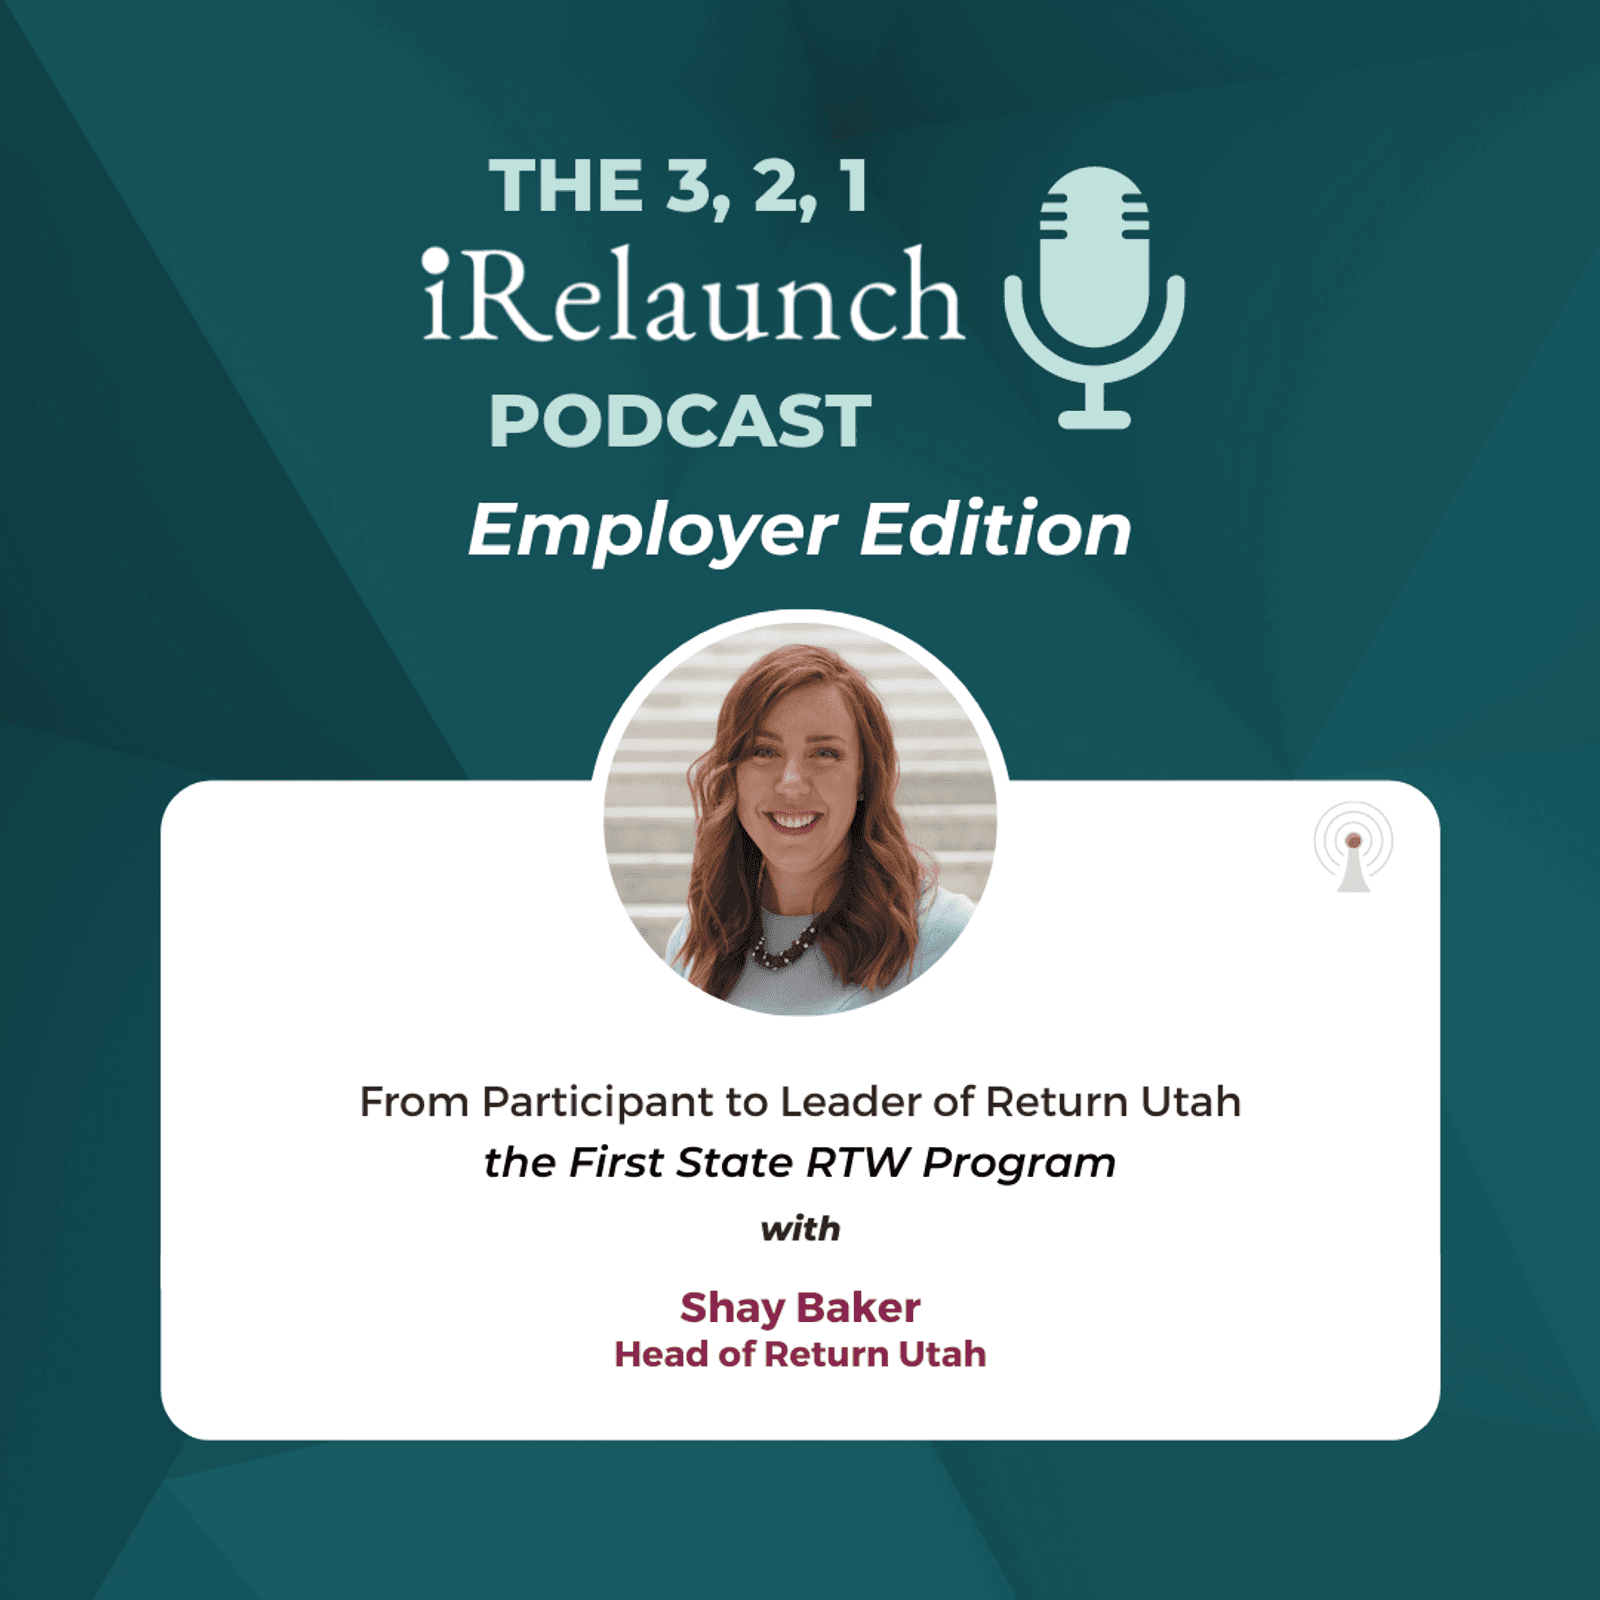 3 2 1 i Relaunch Podcast Employer Edition 1080 x 1080 04 Shay Baker